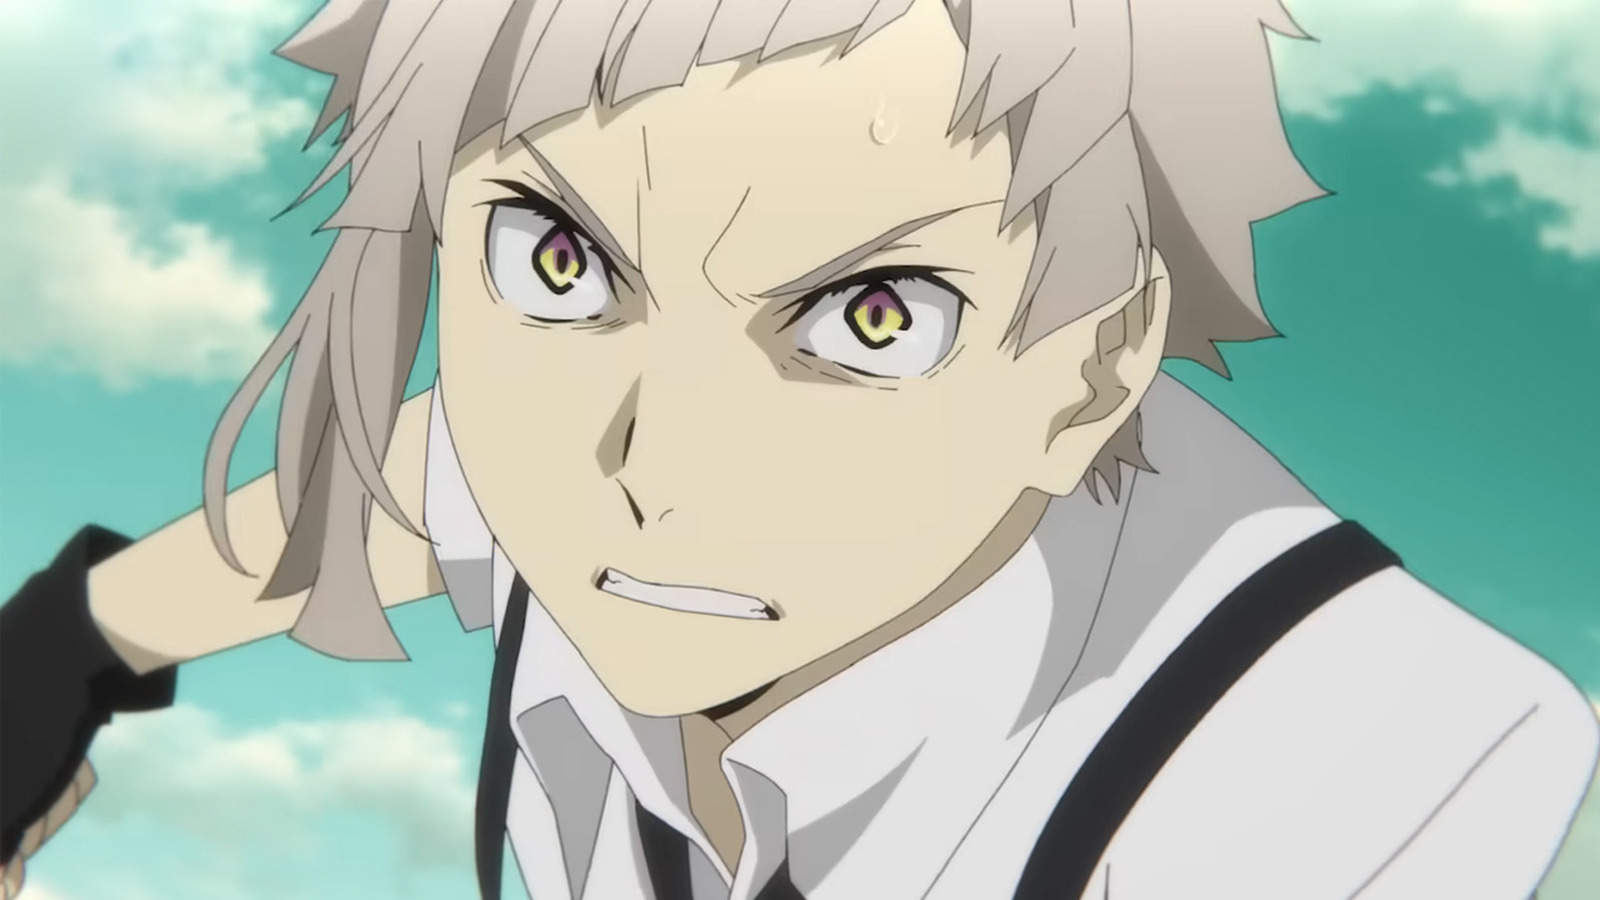 Bungo Stray Dogs Season 5 - What Manga Moments Did the Third